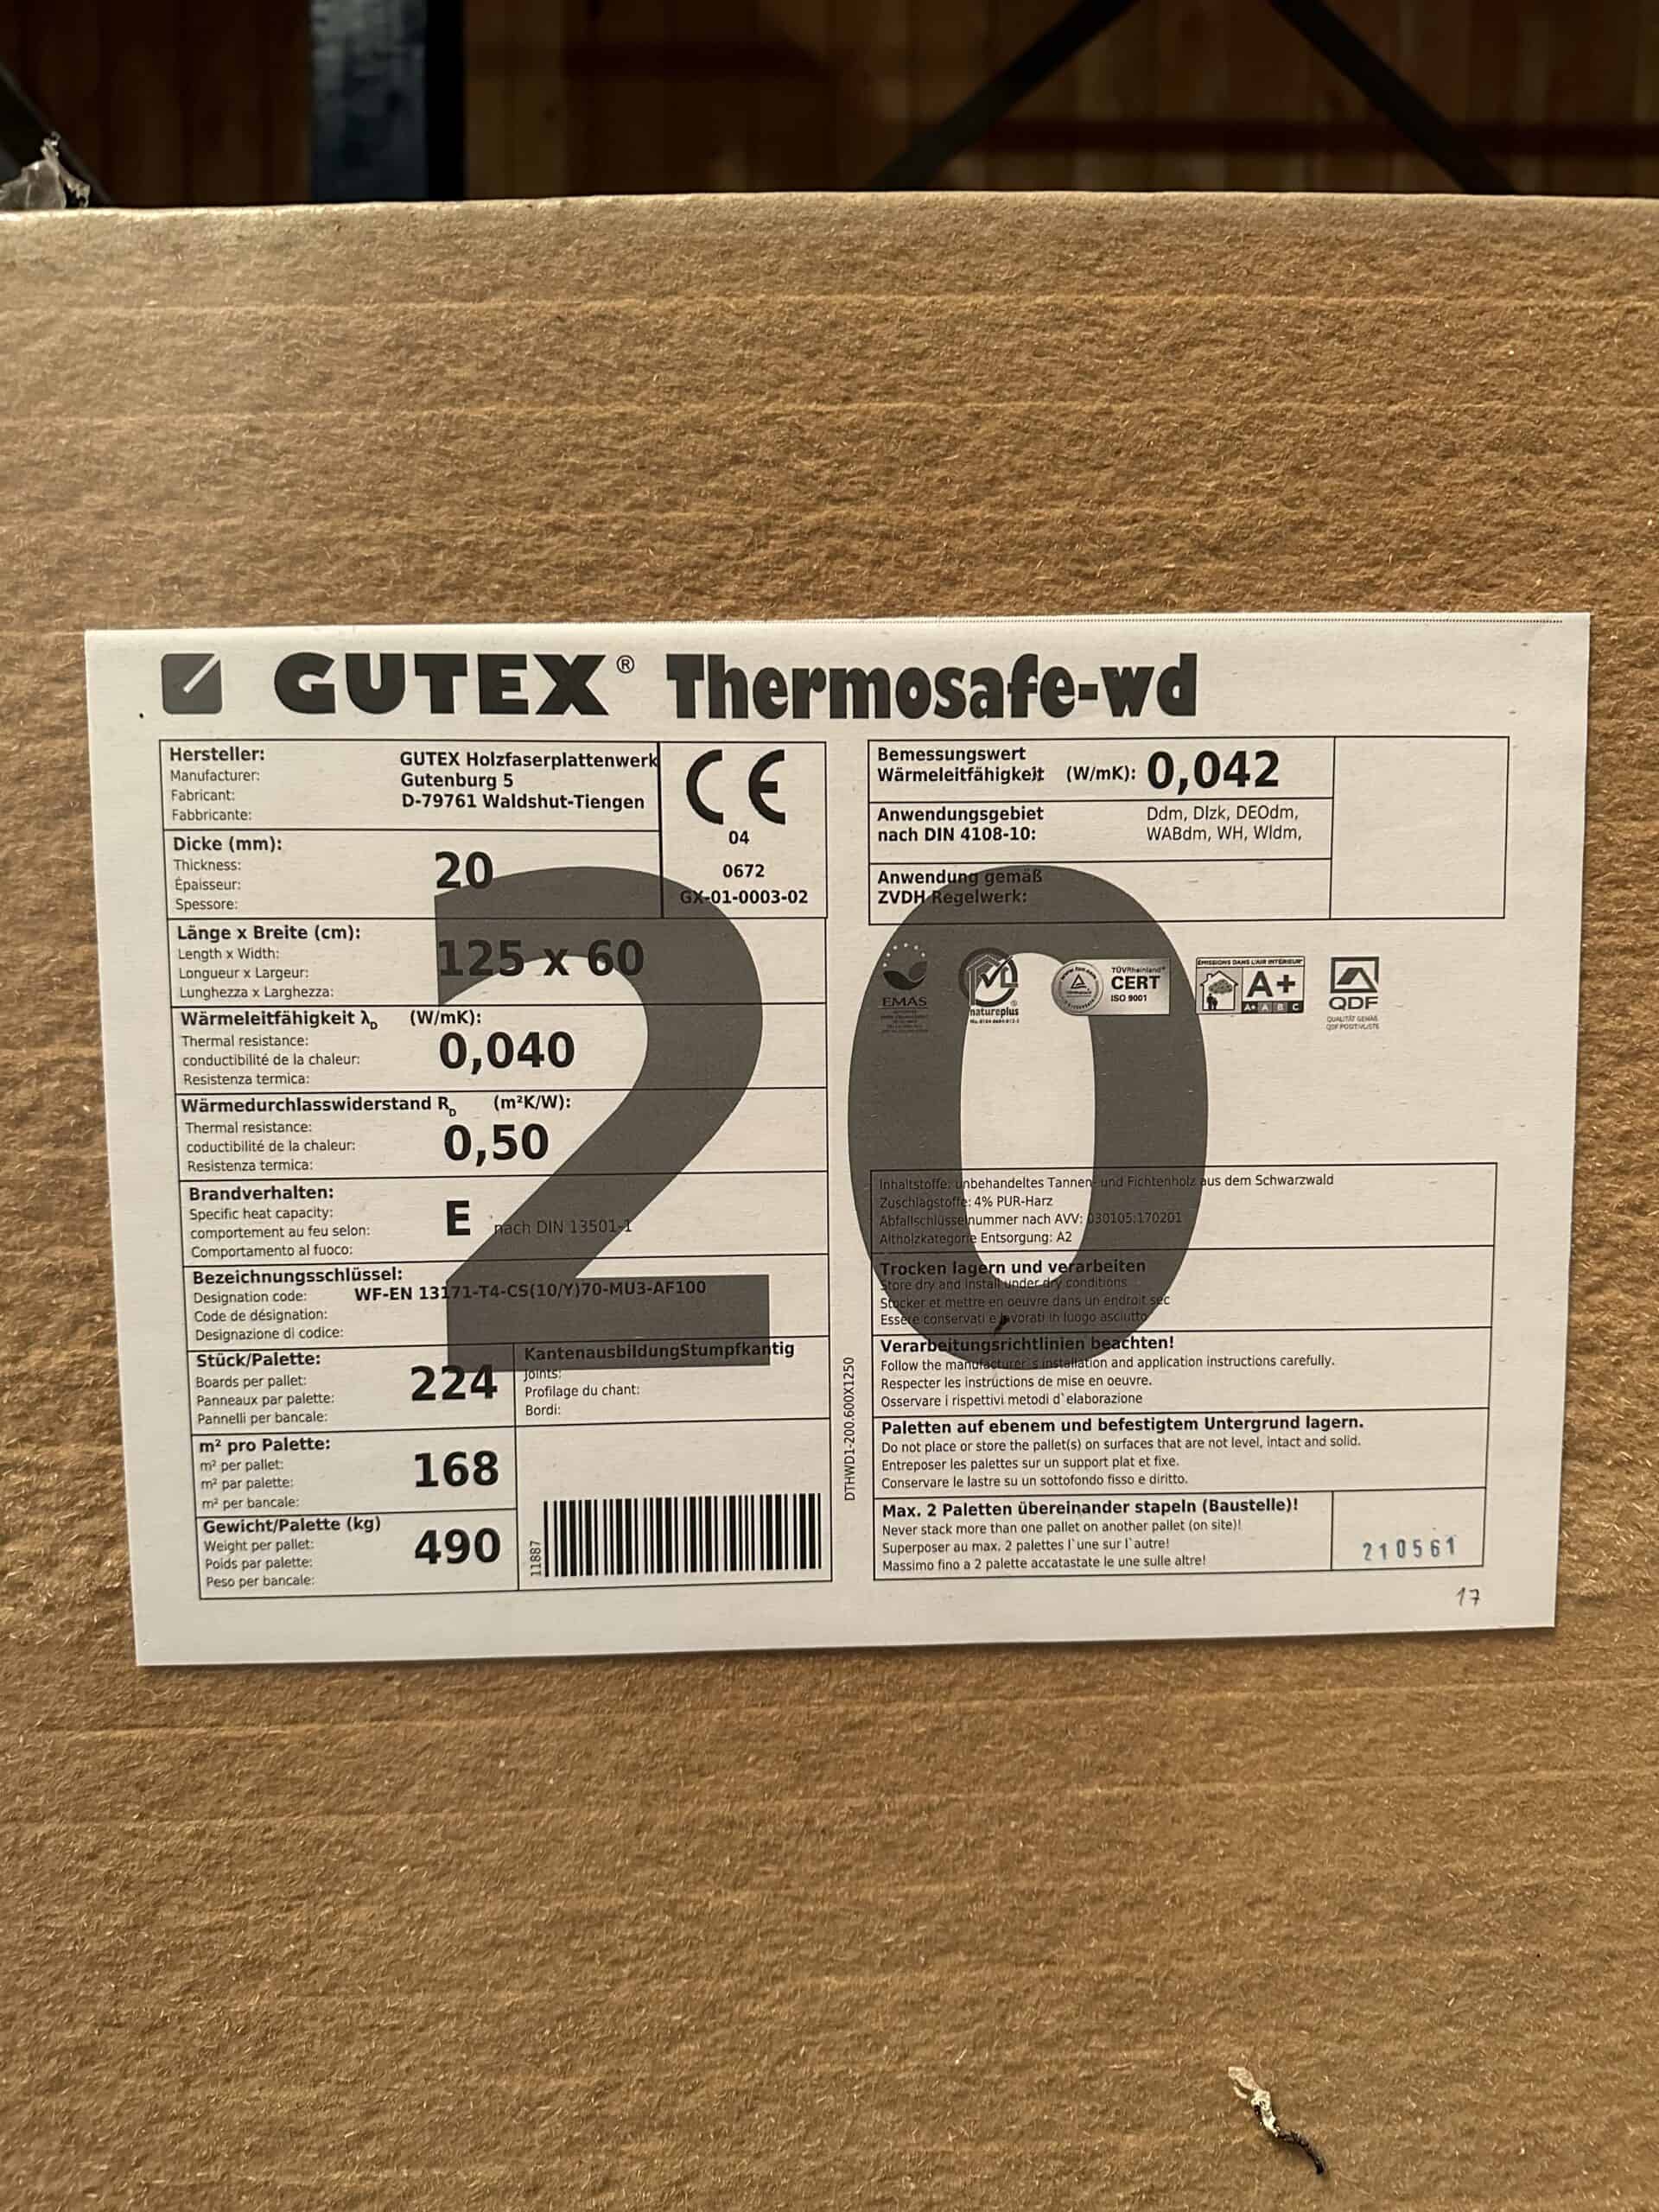 GUTEX Thermosafe-wd